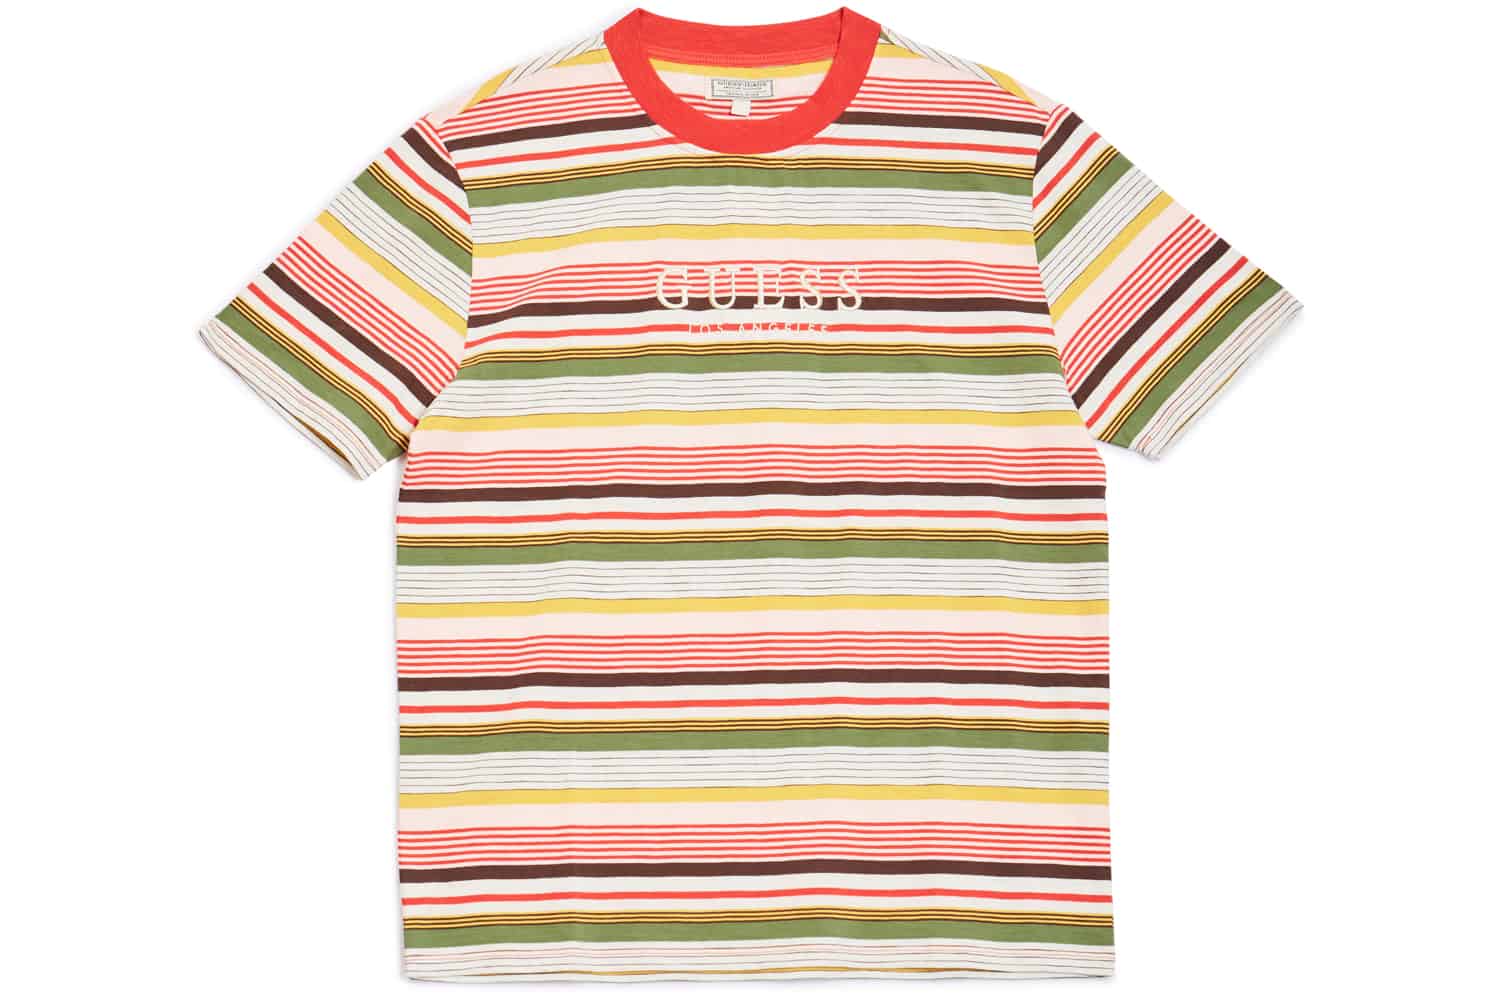 GUESS Originals Stripe Tee (2-14) GUESS | peacecommission.kdsg.gov.ng